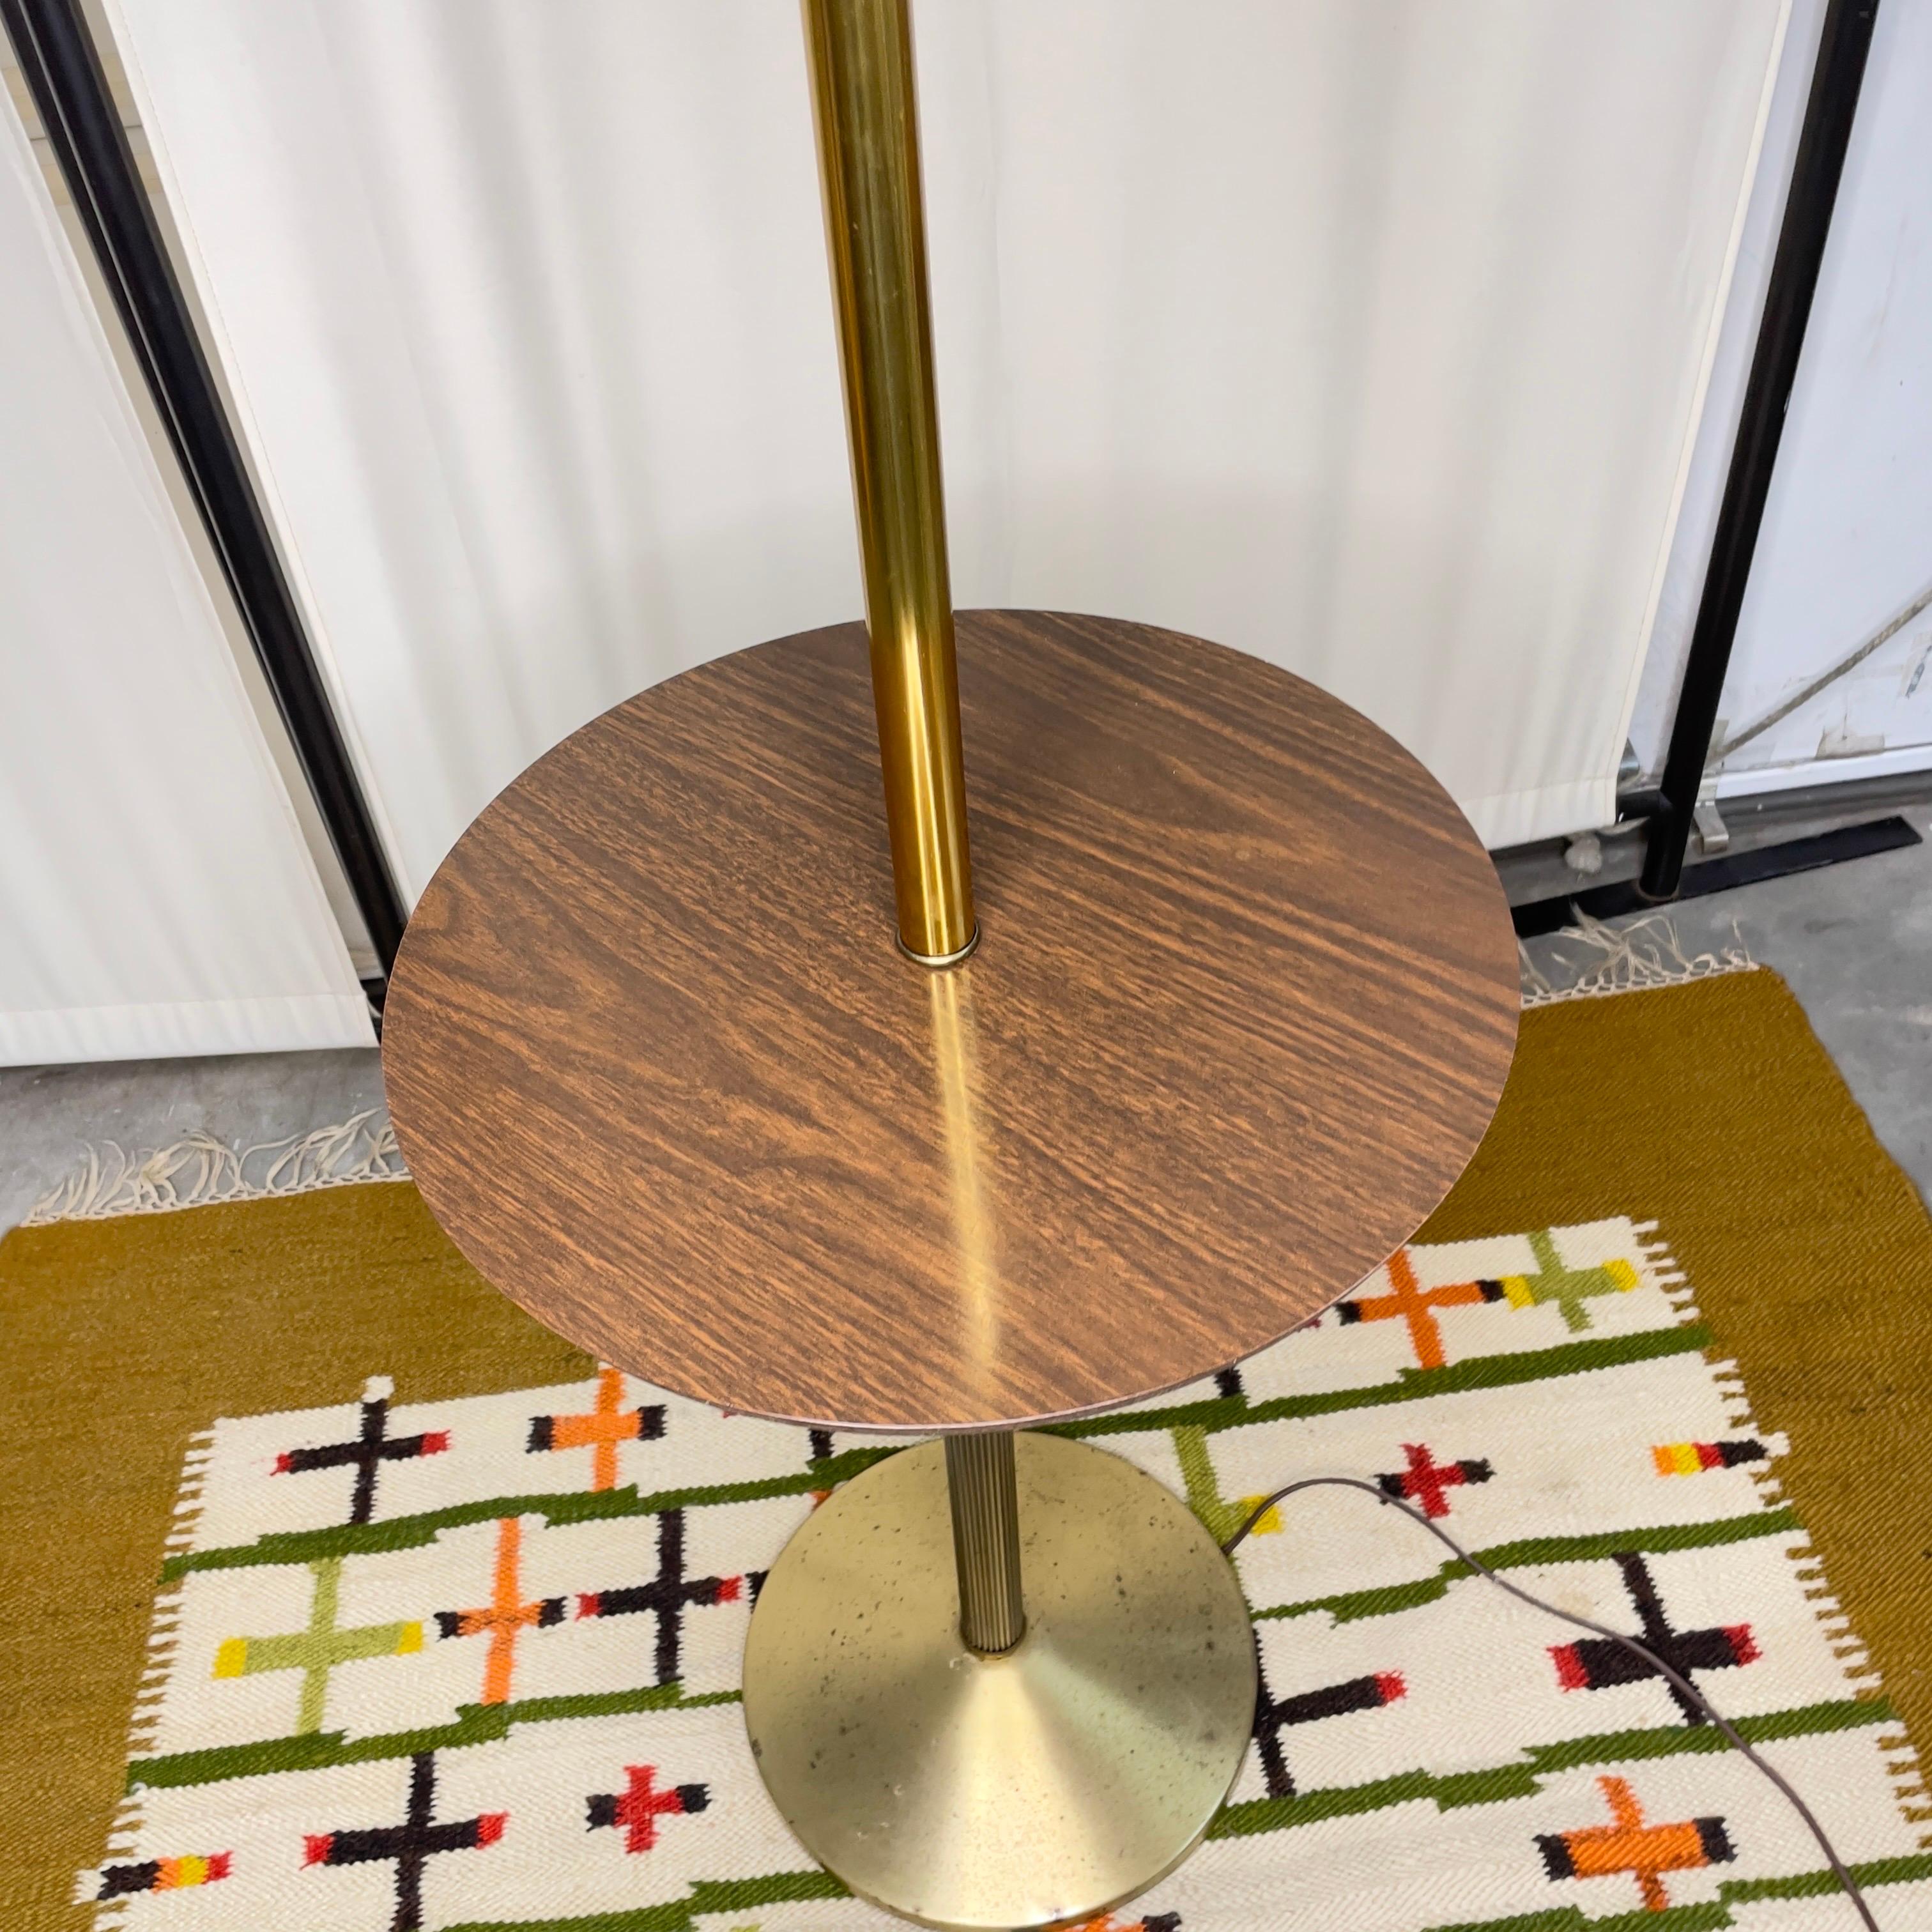 mid century floor lamp with table